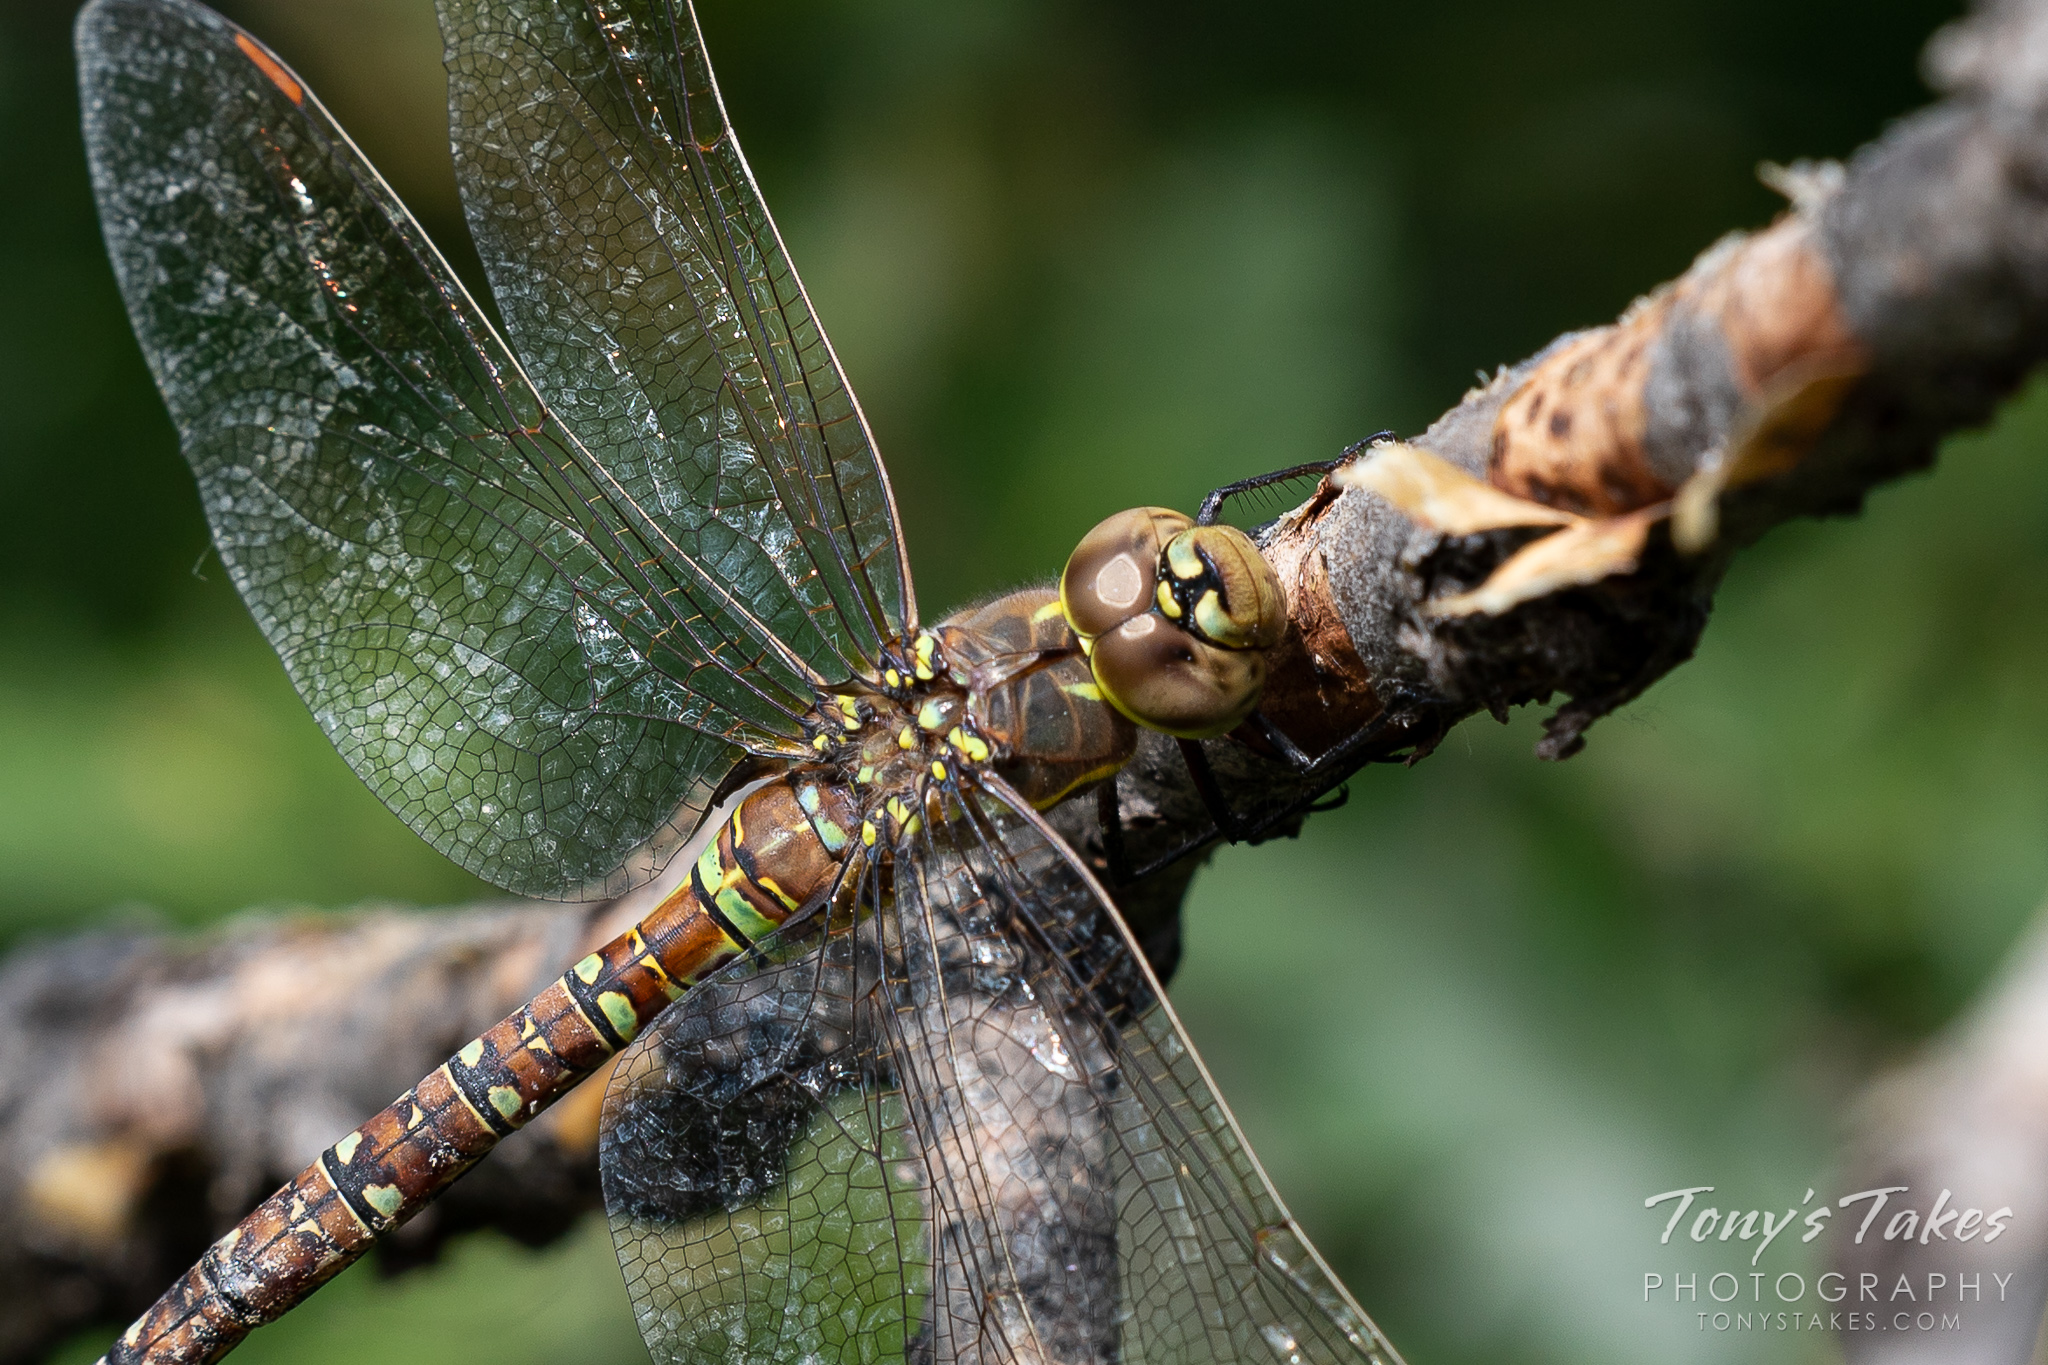 A dragonfly hangs out on a tree branch at Cheyenne Mountain State Park, Colorado. (© Tony’s Takes)